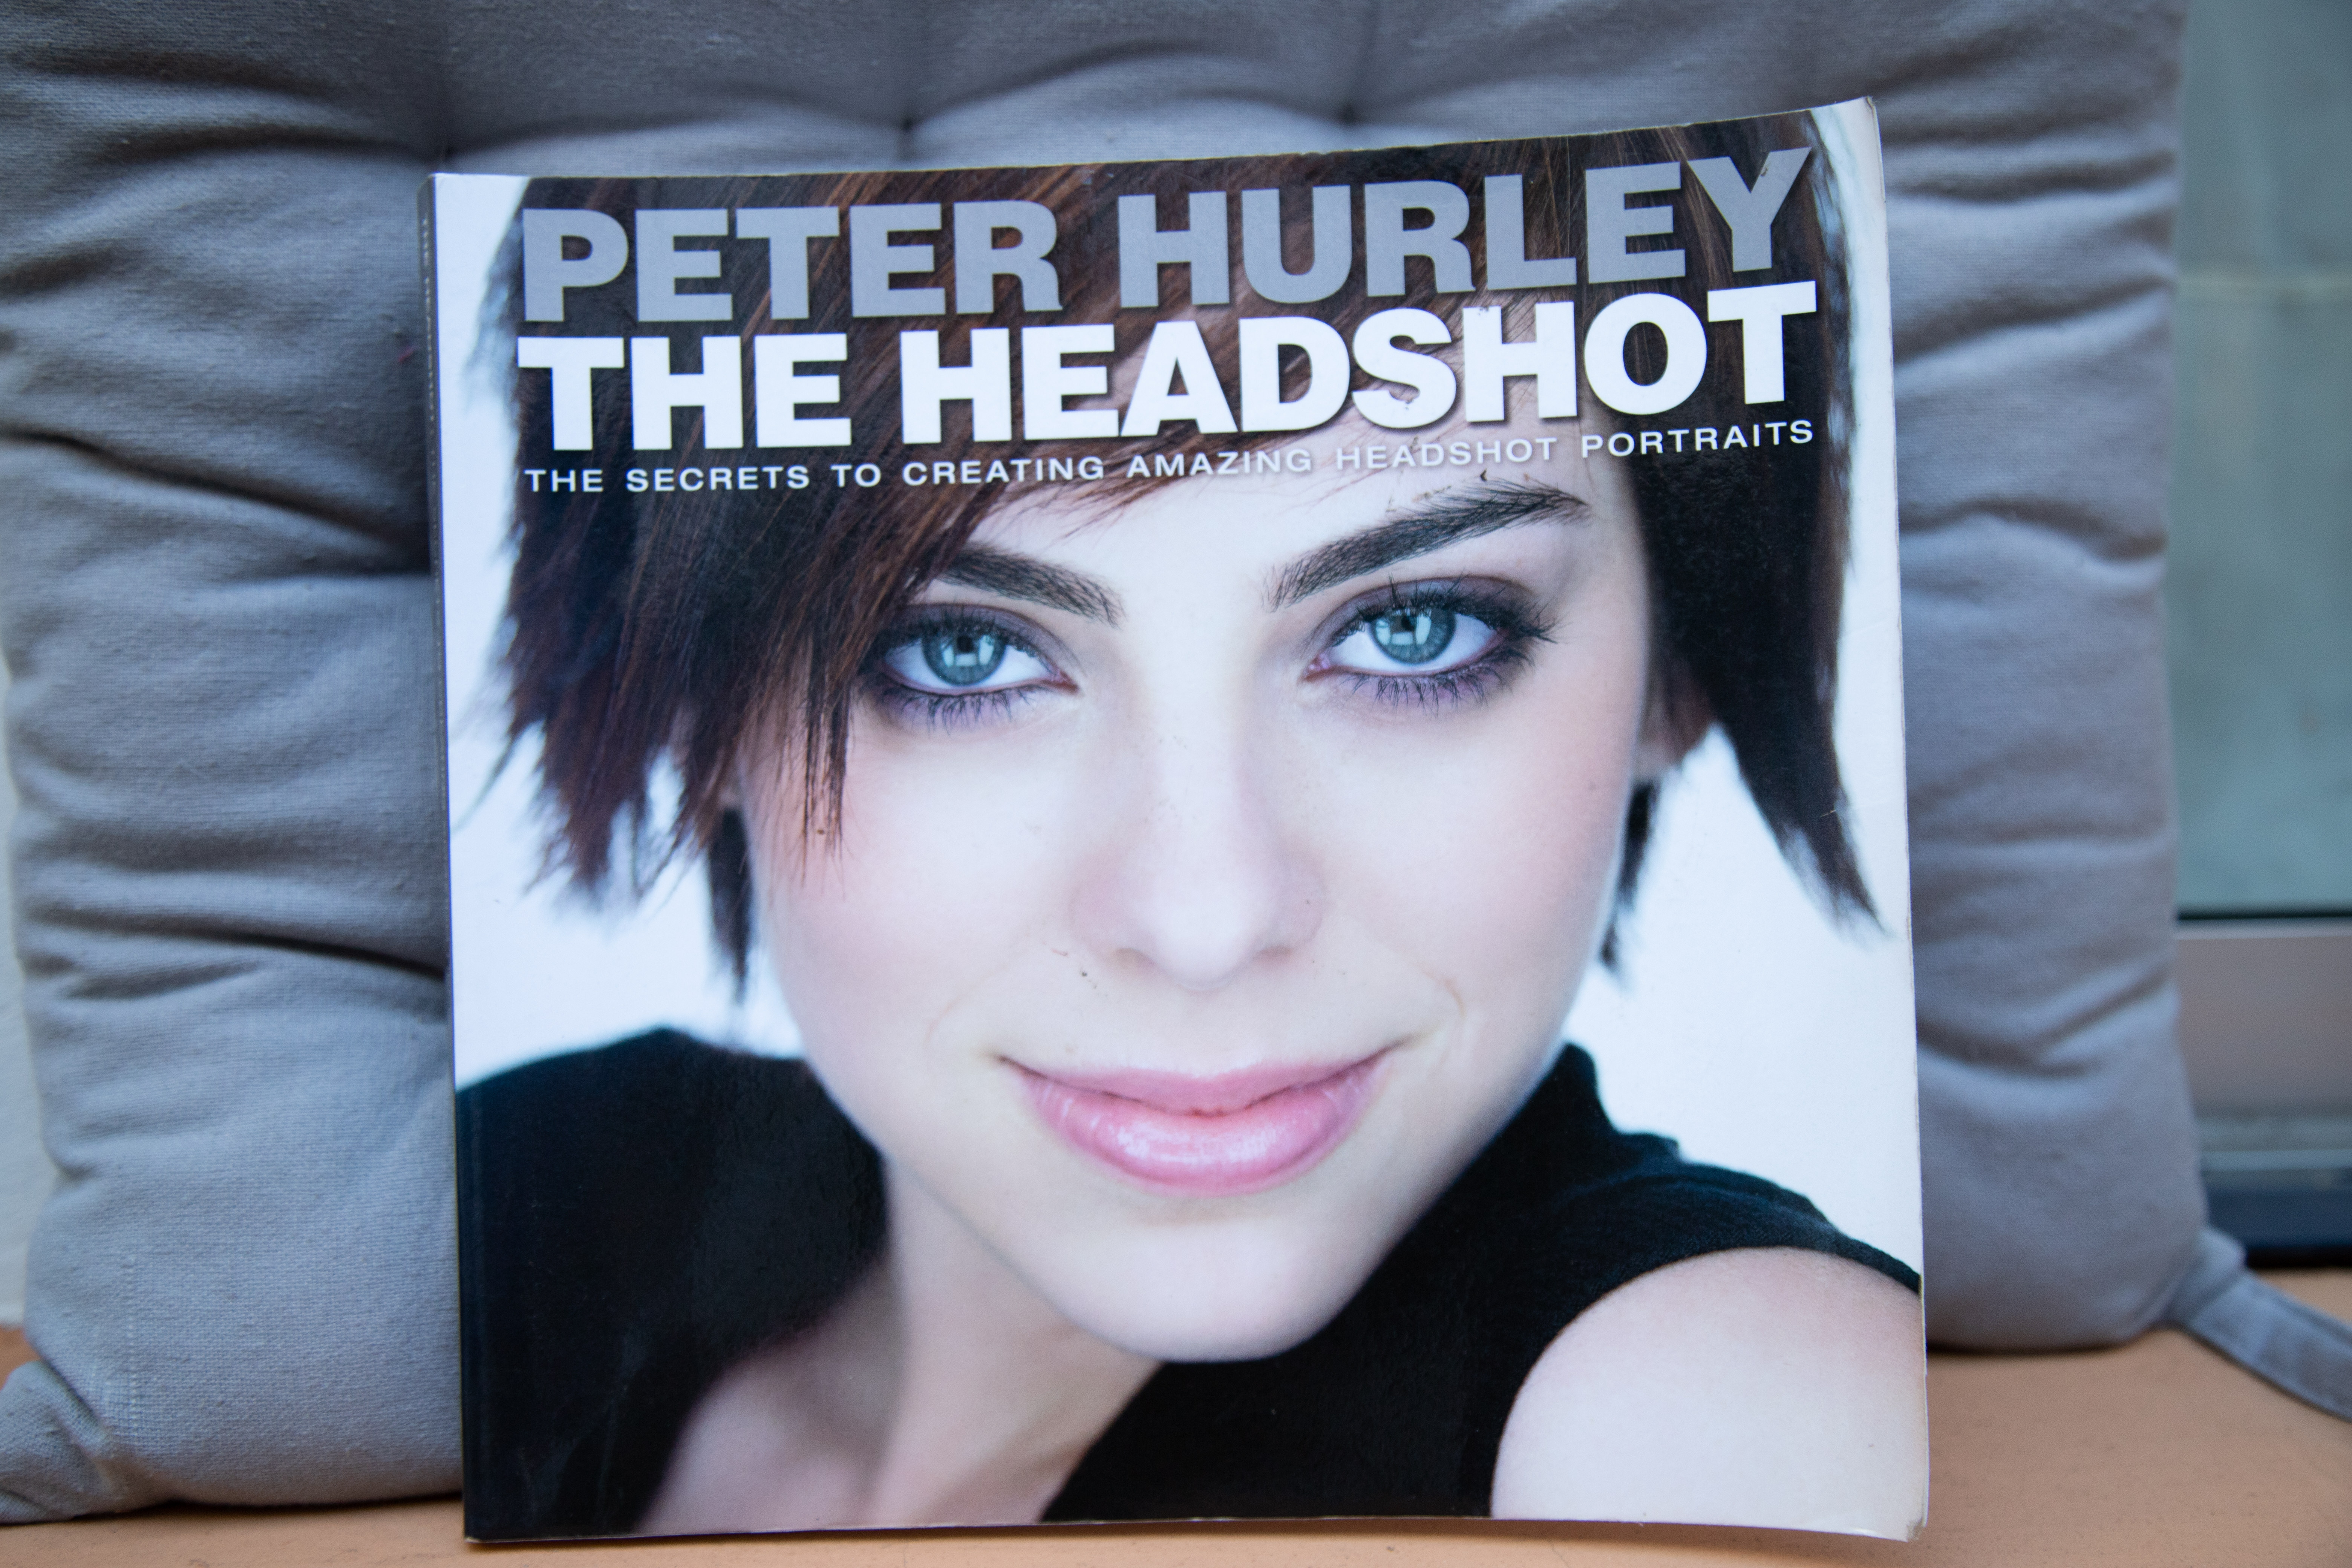 The Headshots, book by Peter Hurley